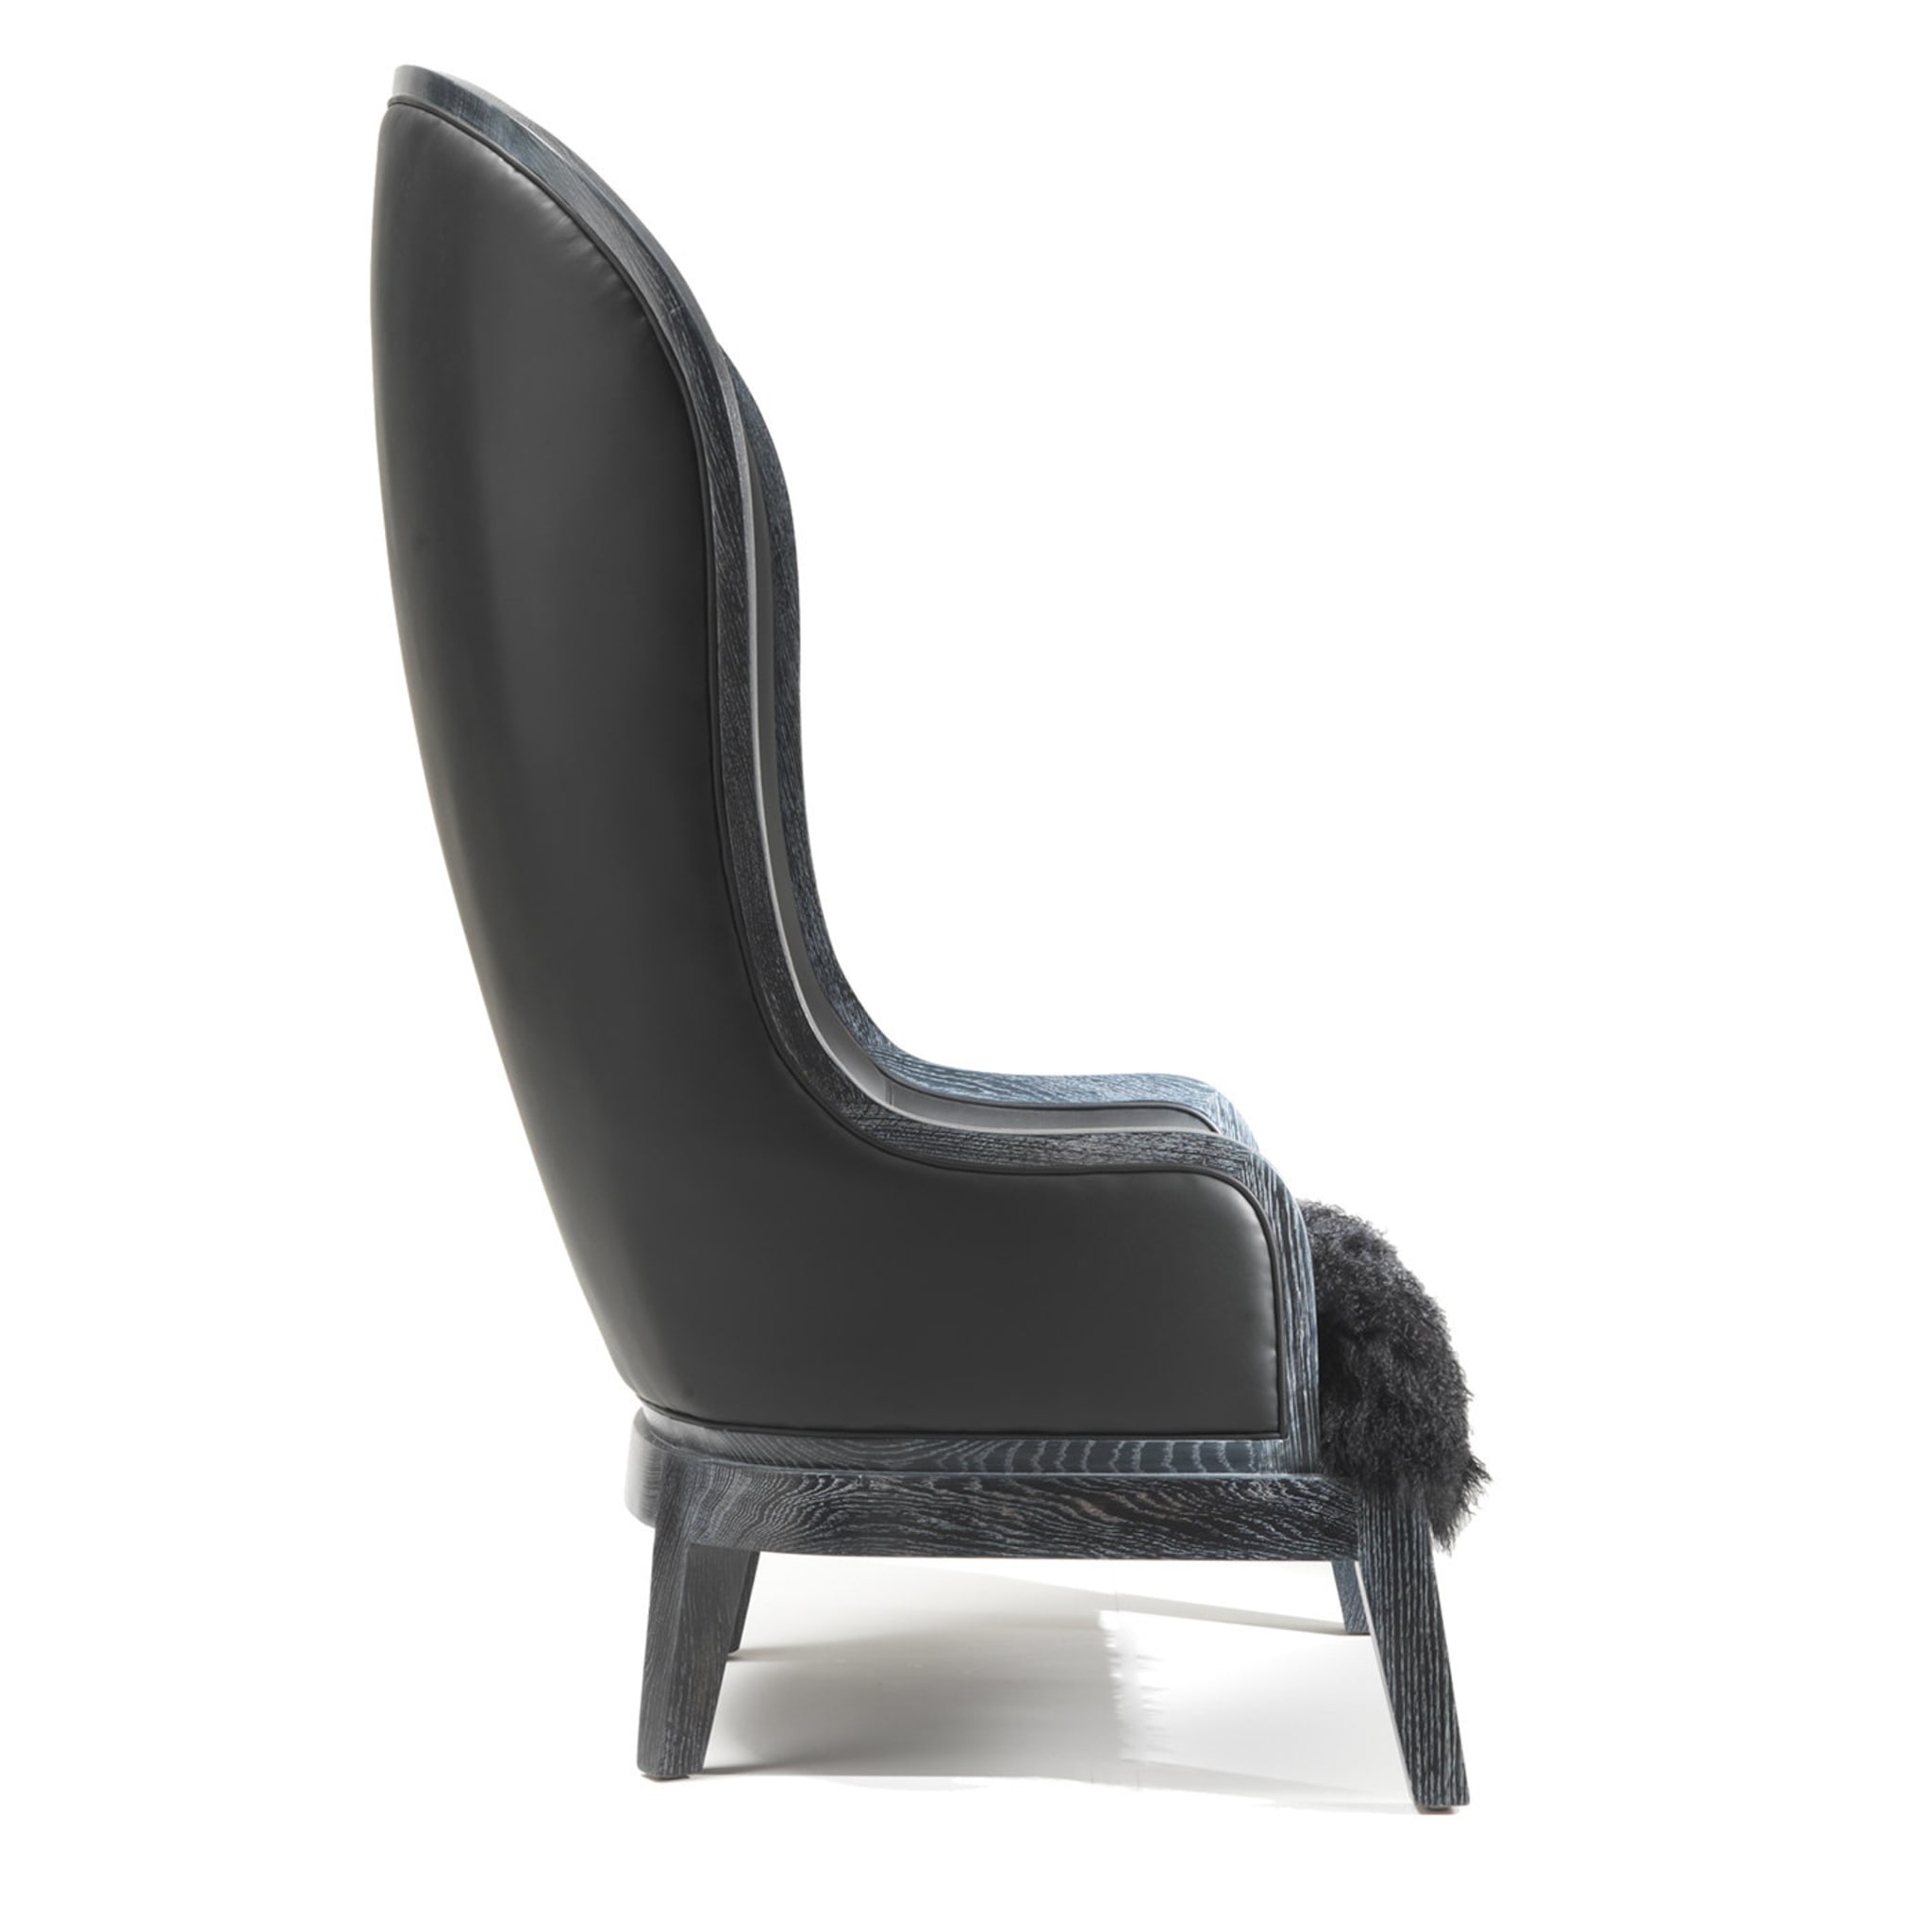 Duchesse of Home Armchair by Archer Humphryes Architects - Alternative view 1